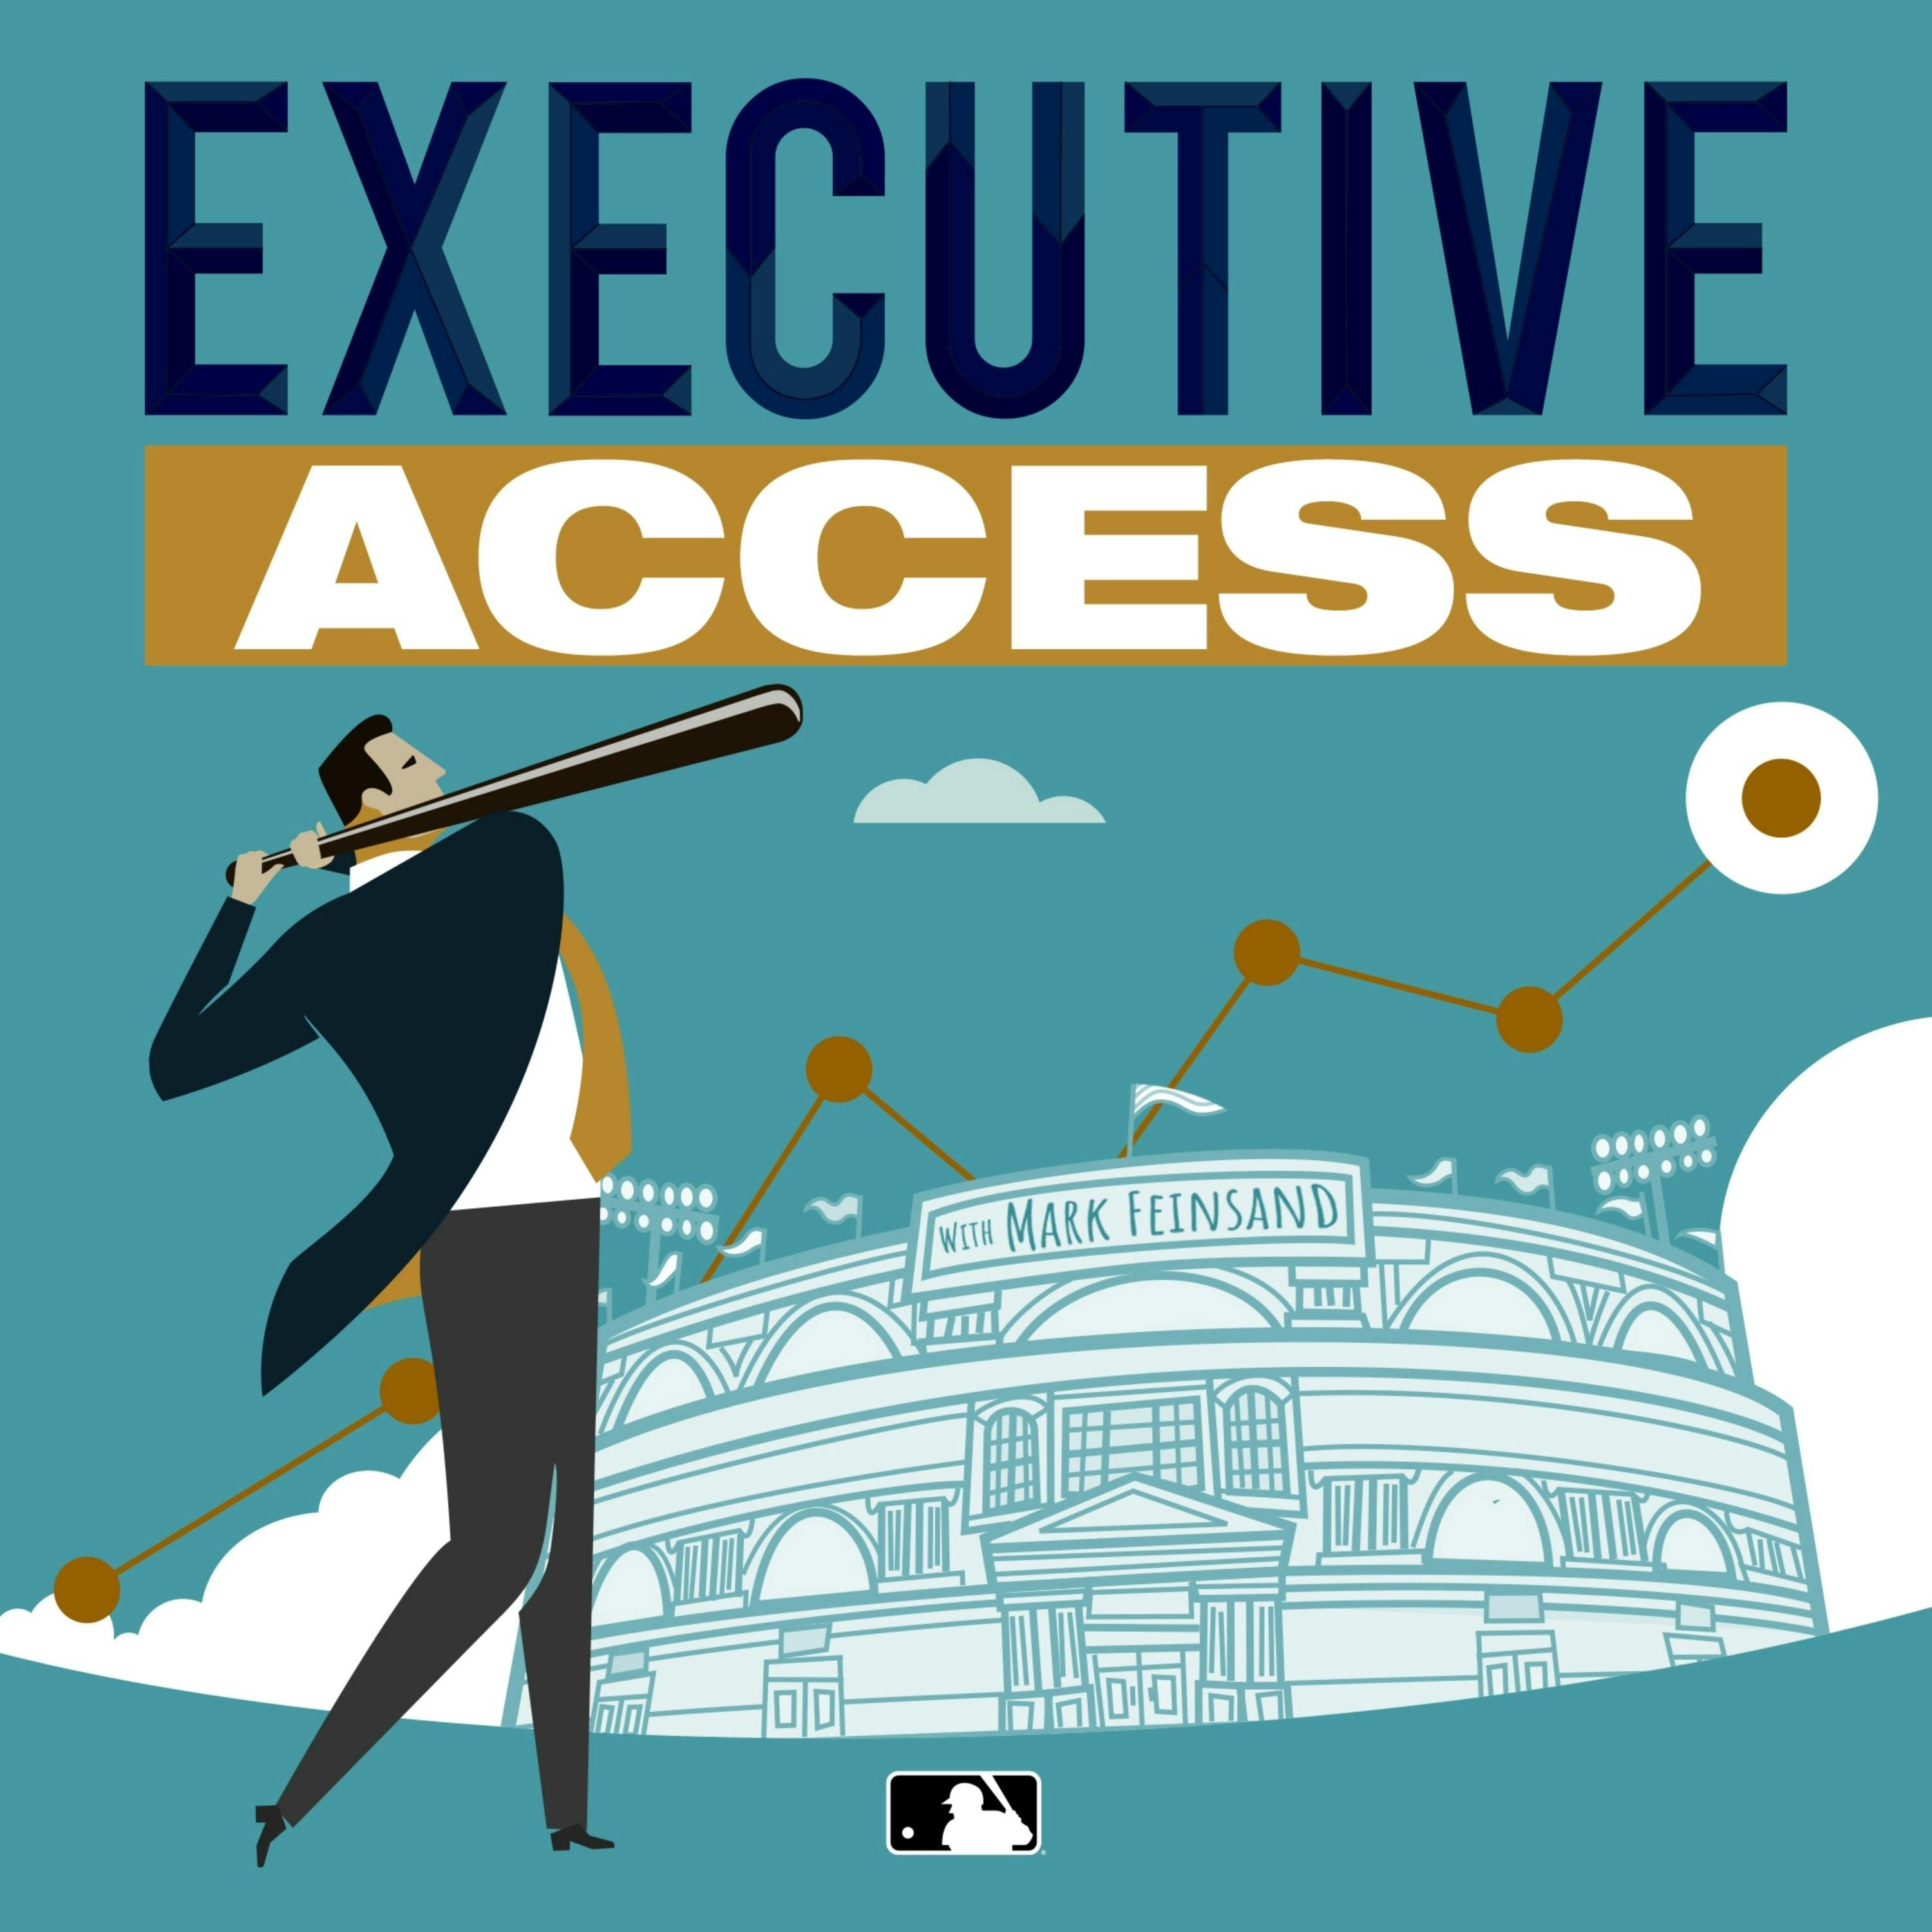 Ep. 27: What the Yankees front office saw in Didi Gregorius in 2014